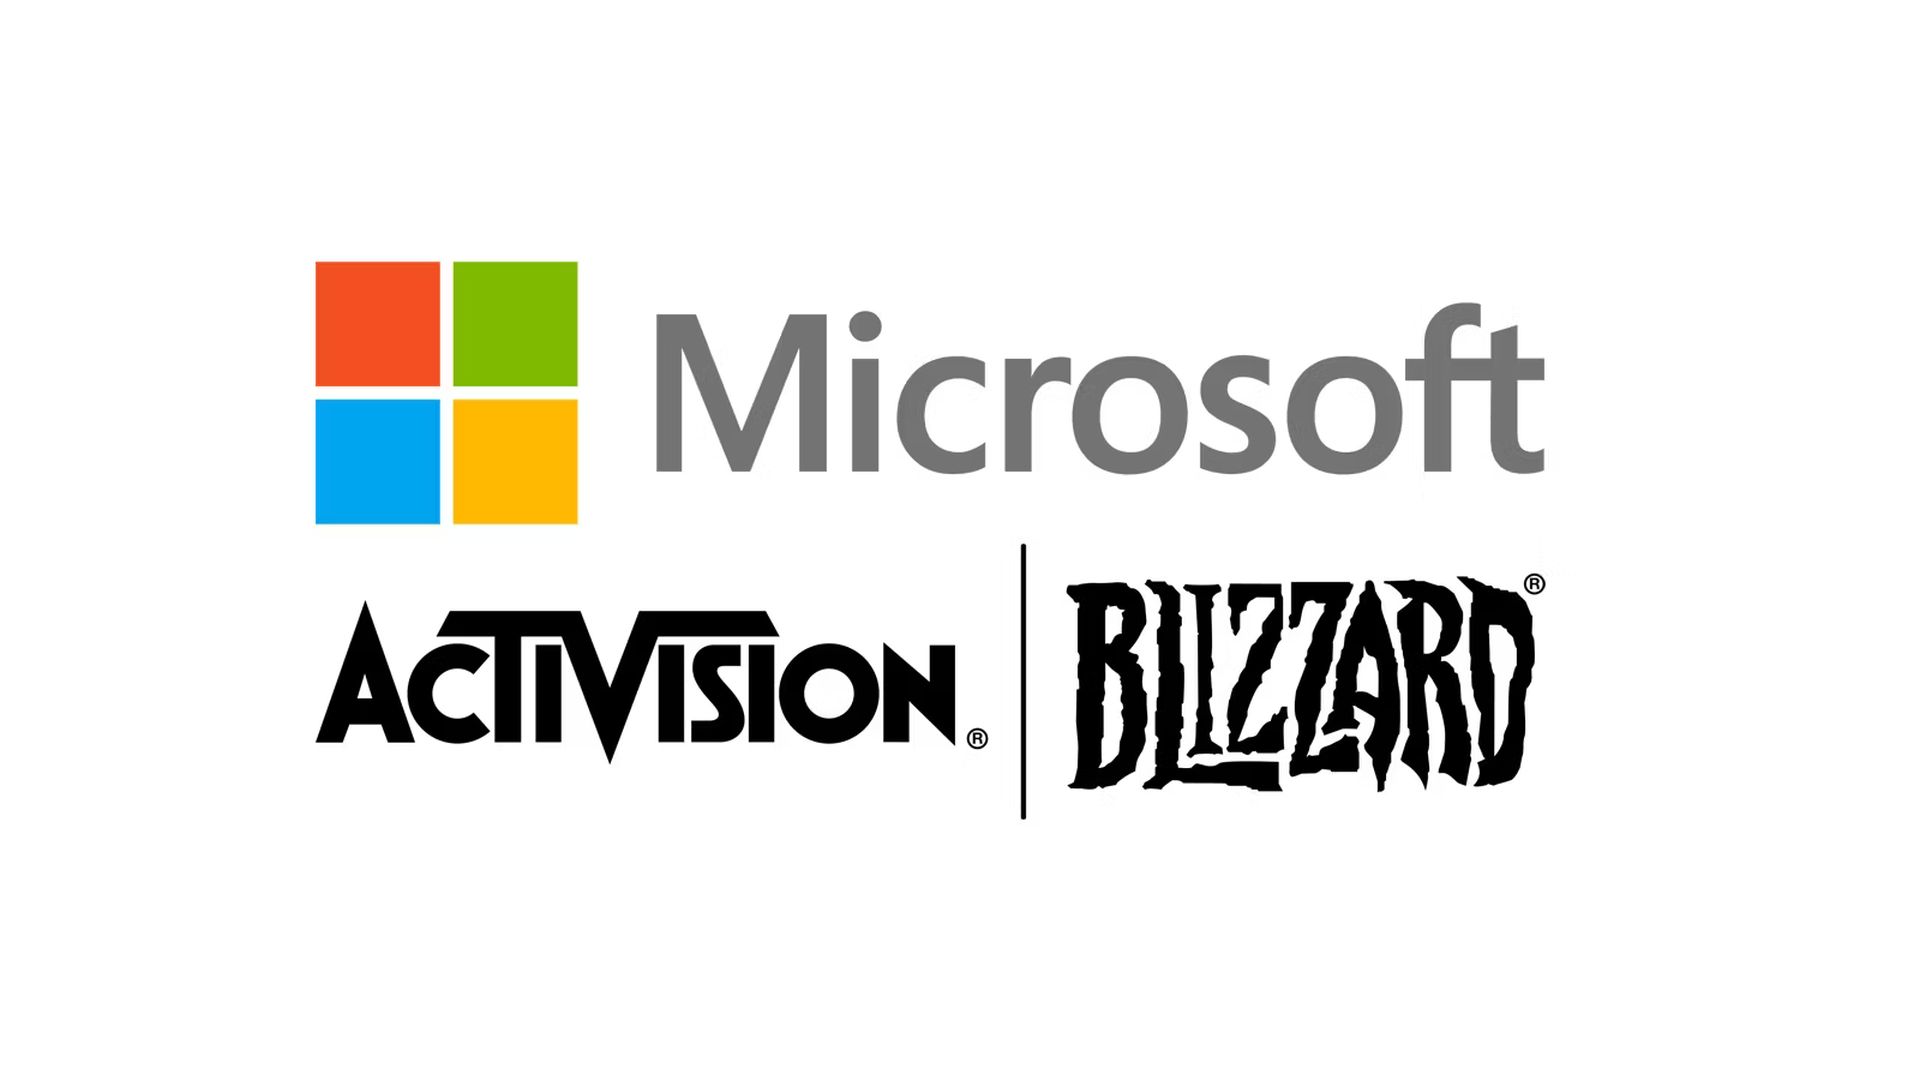 FTC’s Appeal Against Microsoft’s Acquisition of Activision Blizzard Has Been Denied